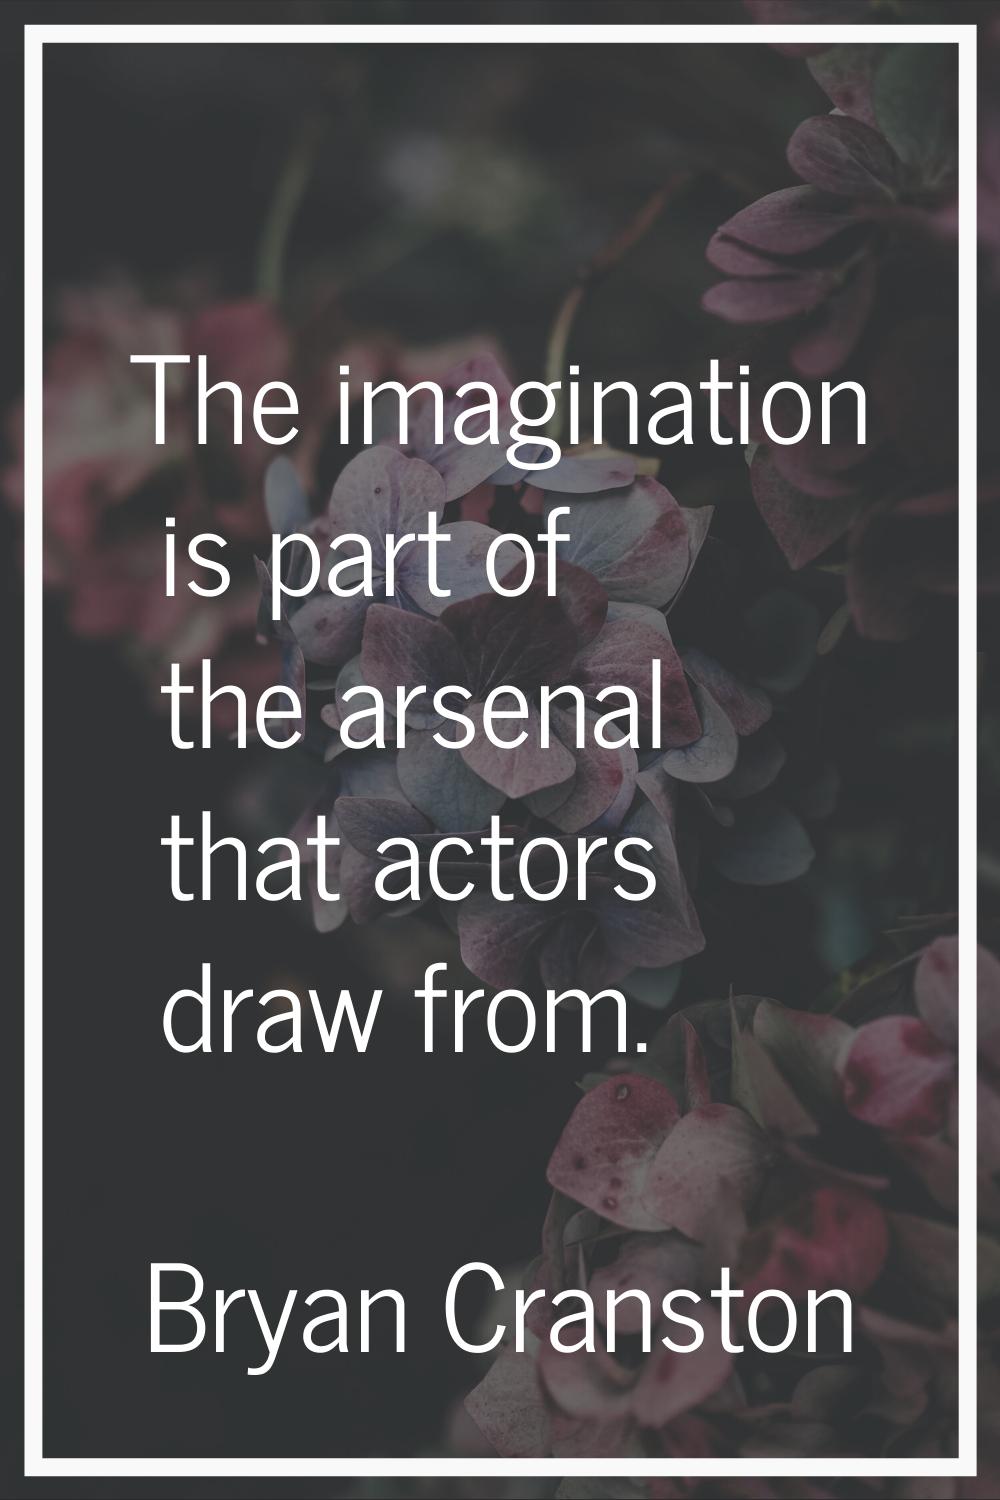 The imagination is part of the arsenal that actors draw from.